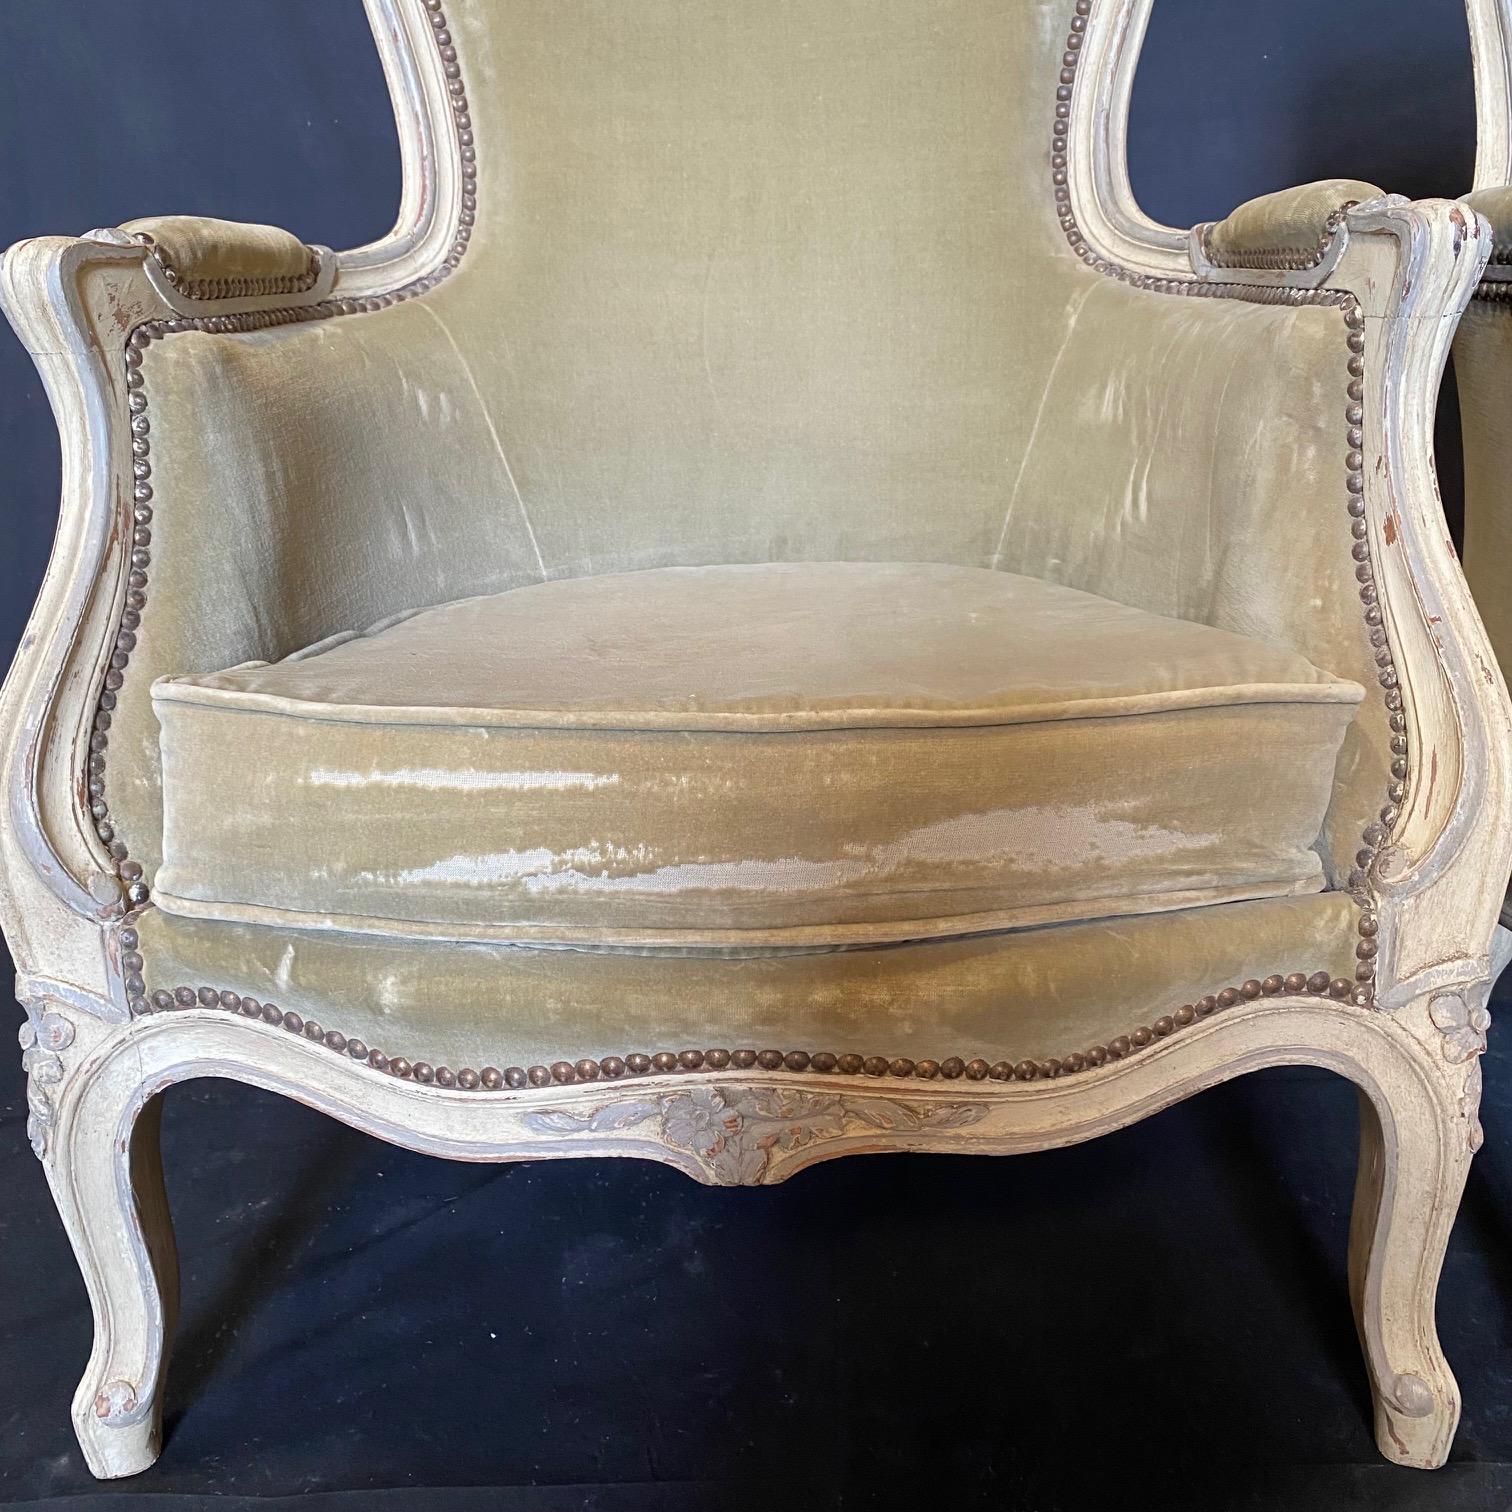 Really lovely all original soft moss green period Louis XV mohair armchairs or bergeres. All original creamy white paint that perfectly complements the luxurious moss green mohair. Floral wreath carving on center top and apron of the chair, all